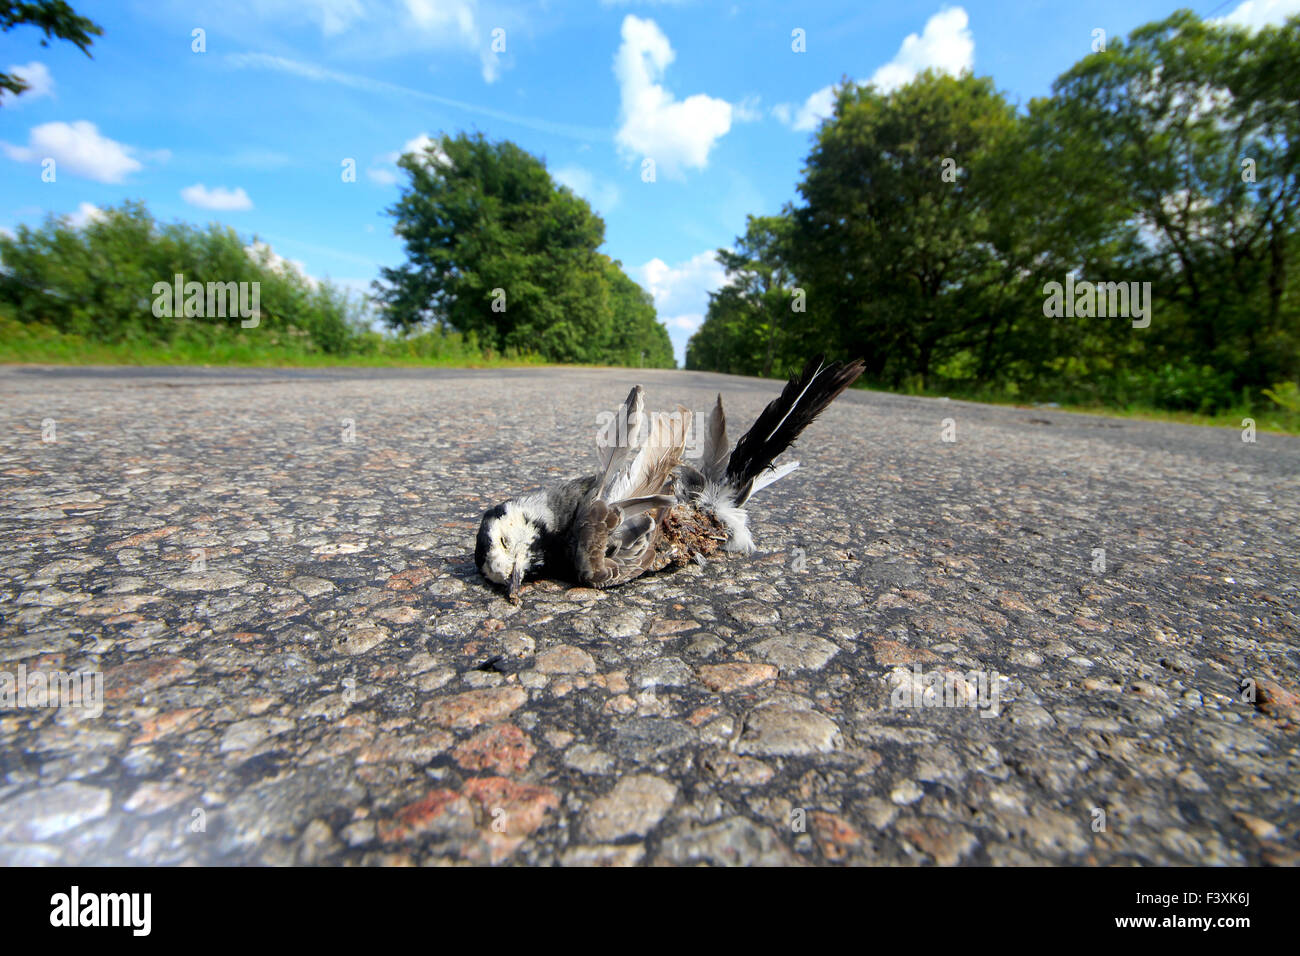 bird killed by car on the road Stock Photo